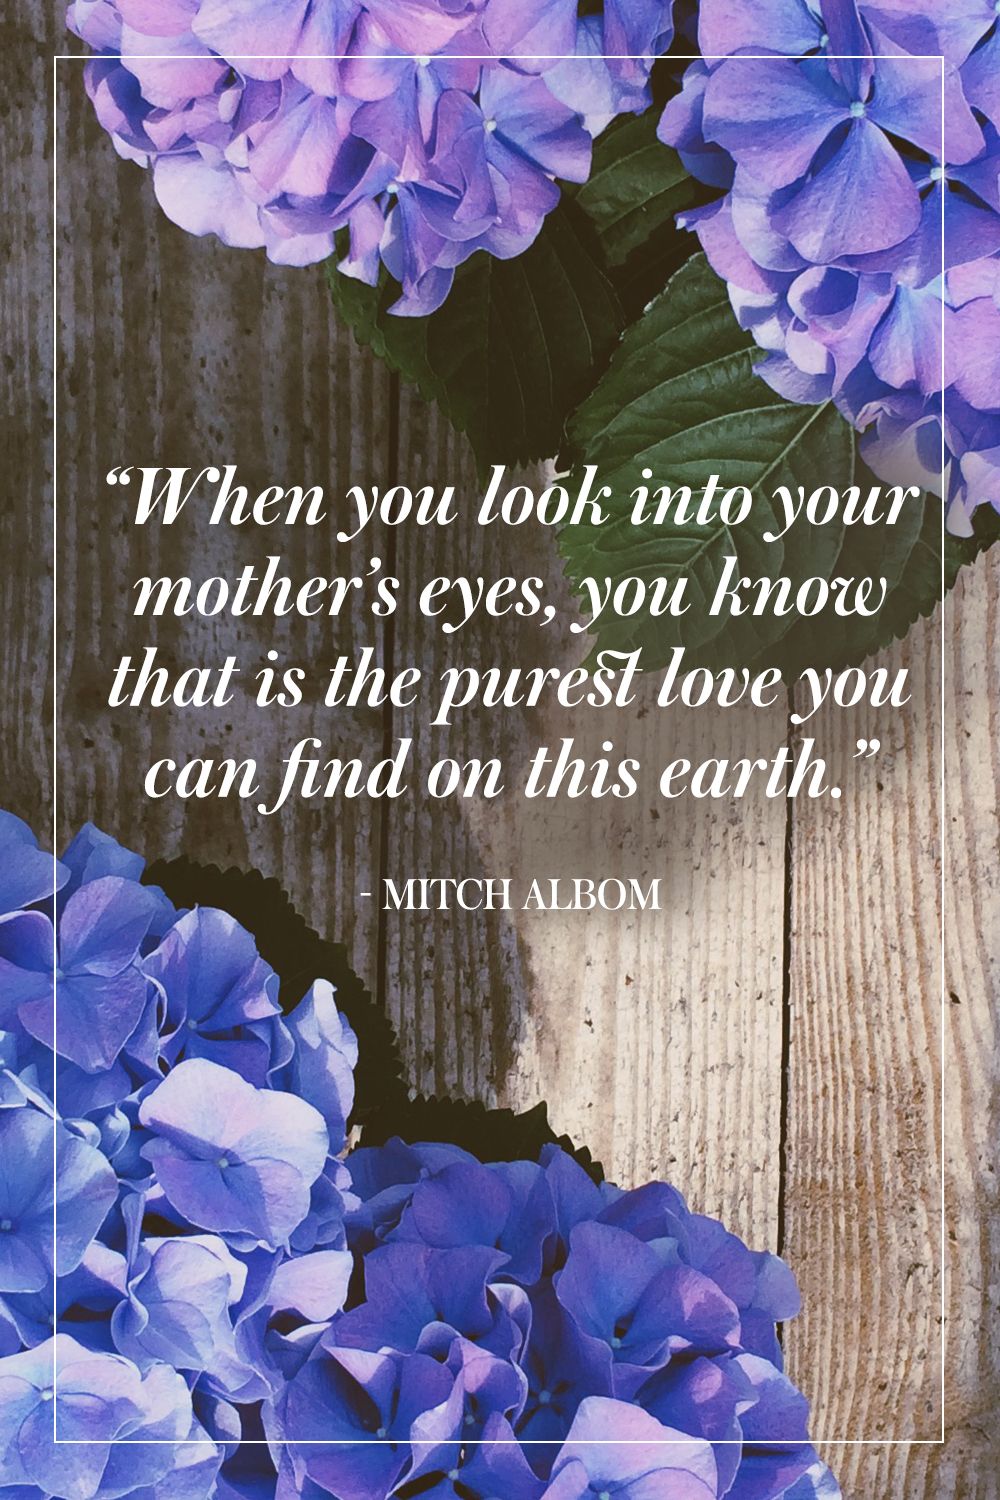 21 Best Mother'S Day Quotes - Beautiful Mom Sayings For Mothers Day 2018